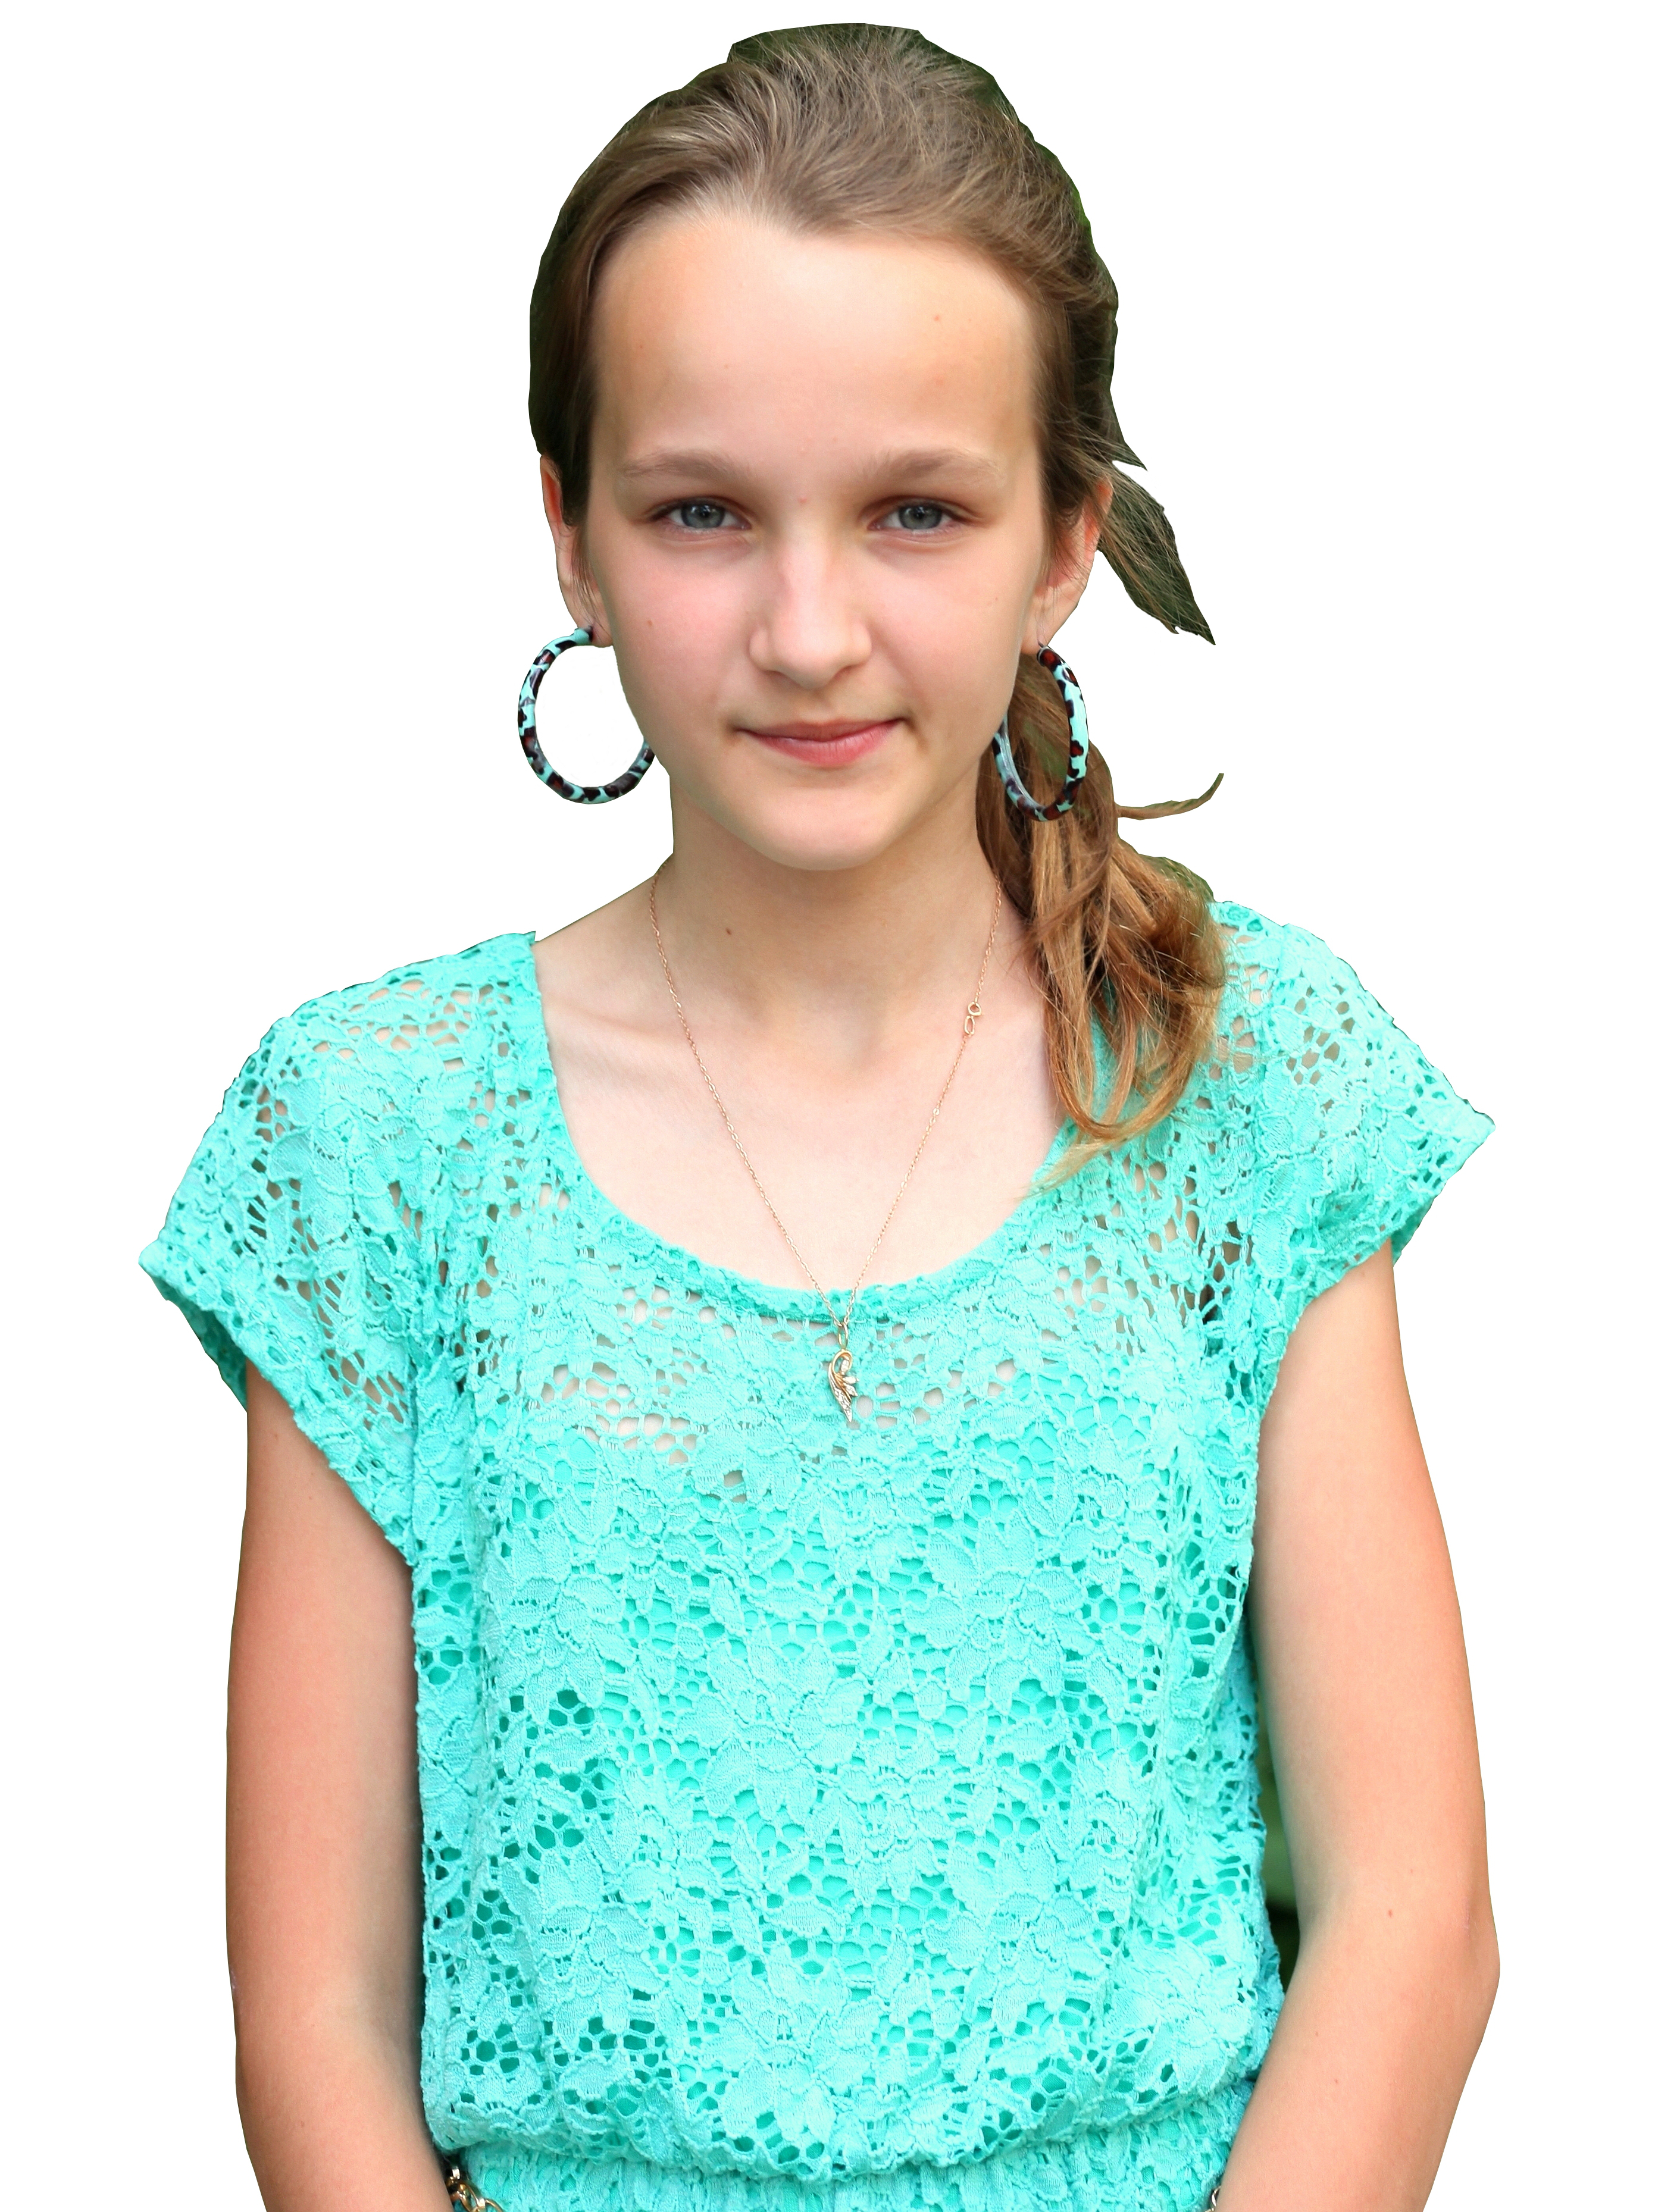 an absolutely beautiful girl (a Catholic Christian) with earrings, photographed in June 2013, portrait 7/27